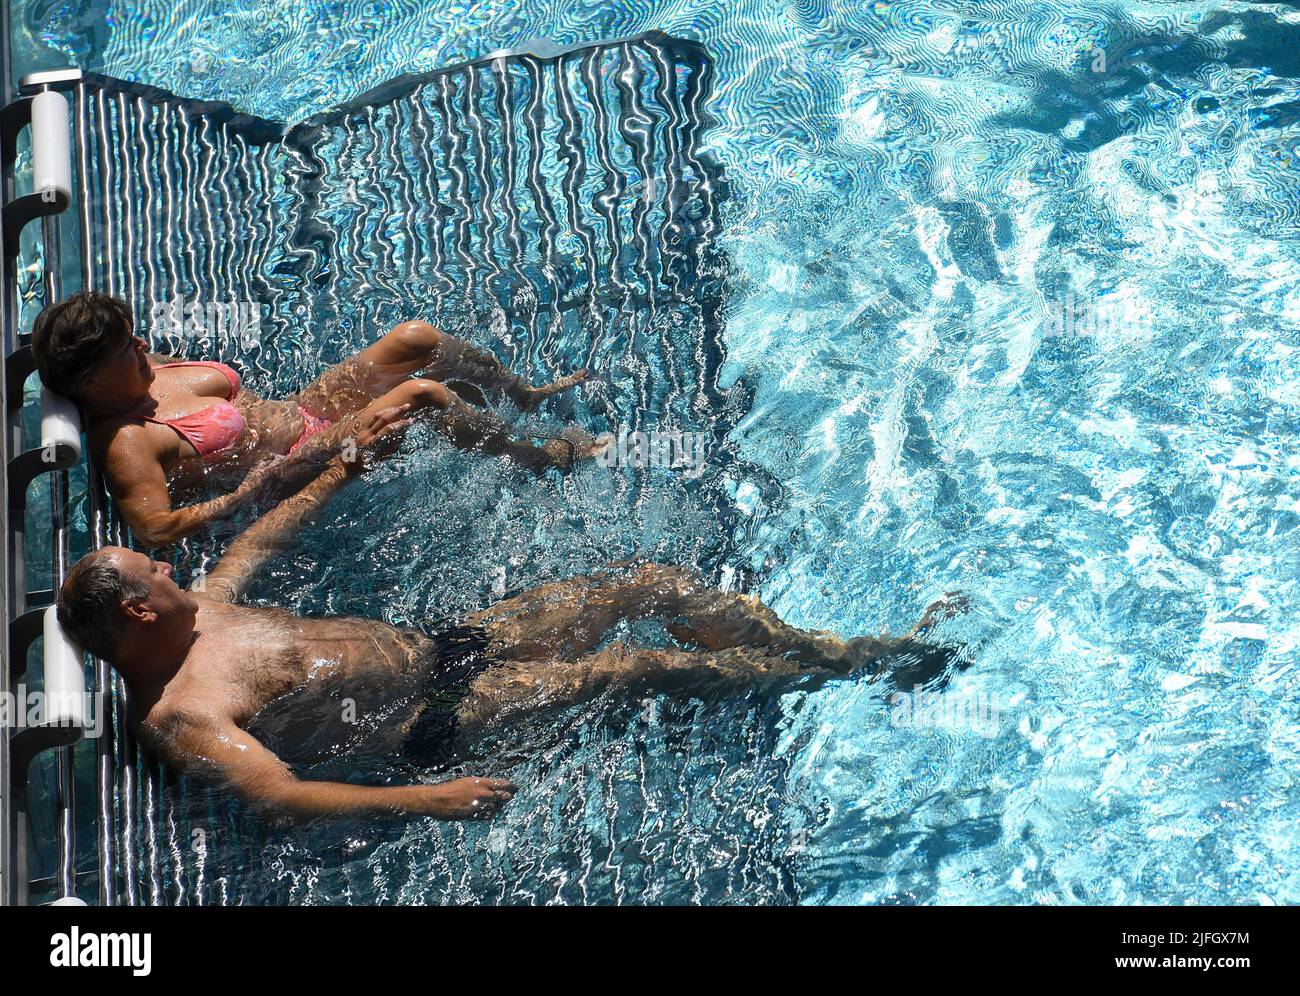 Karlovy Vary, Czech Republic. 03rd July, 2022. The 56th Karlovy Vary International Film Festival continues on July 3rrd, 2022, Karlovy Vary, Czech Republic. People swim in the pool of the festival's Thermal Hotel. Credit: Katerina Sulova/CTK Photo/Alamy Live News Stock Photo